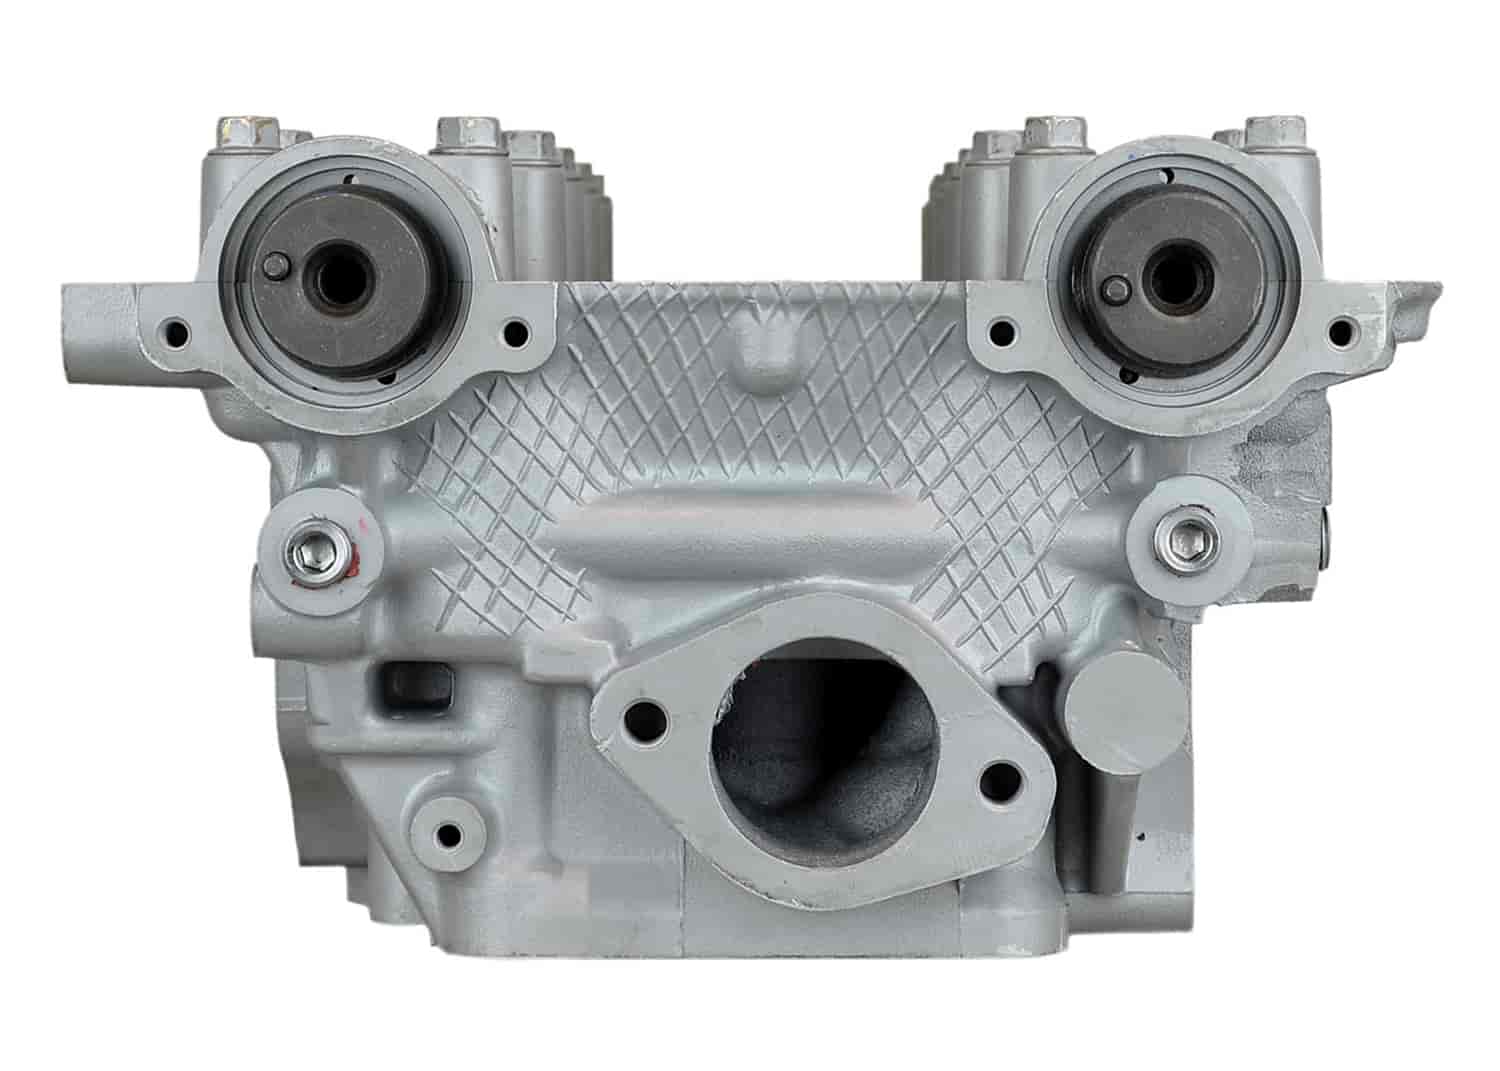 Remanufactured Cylinder Head for 1995-2002 Kia Sportage with